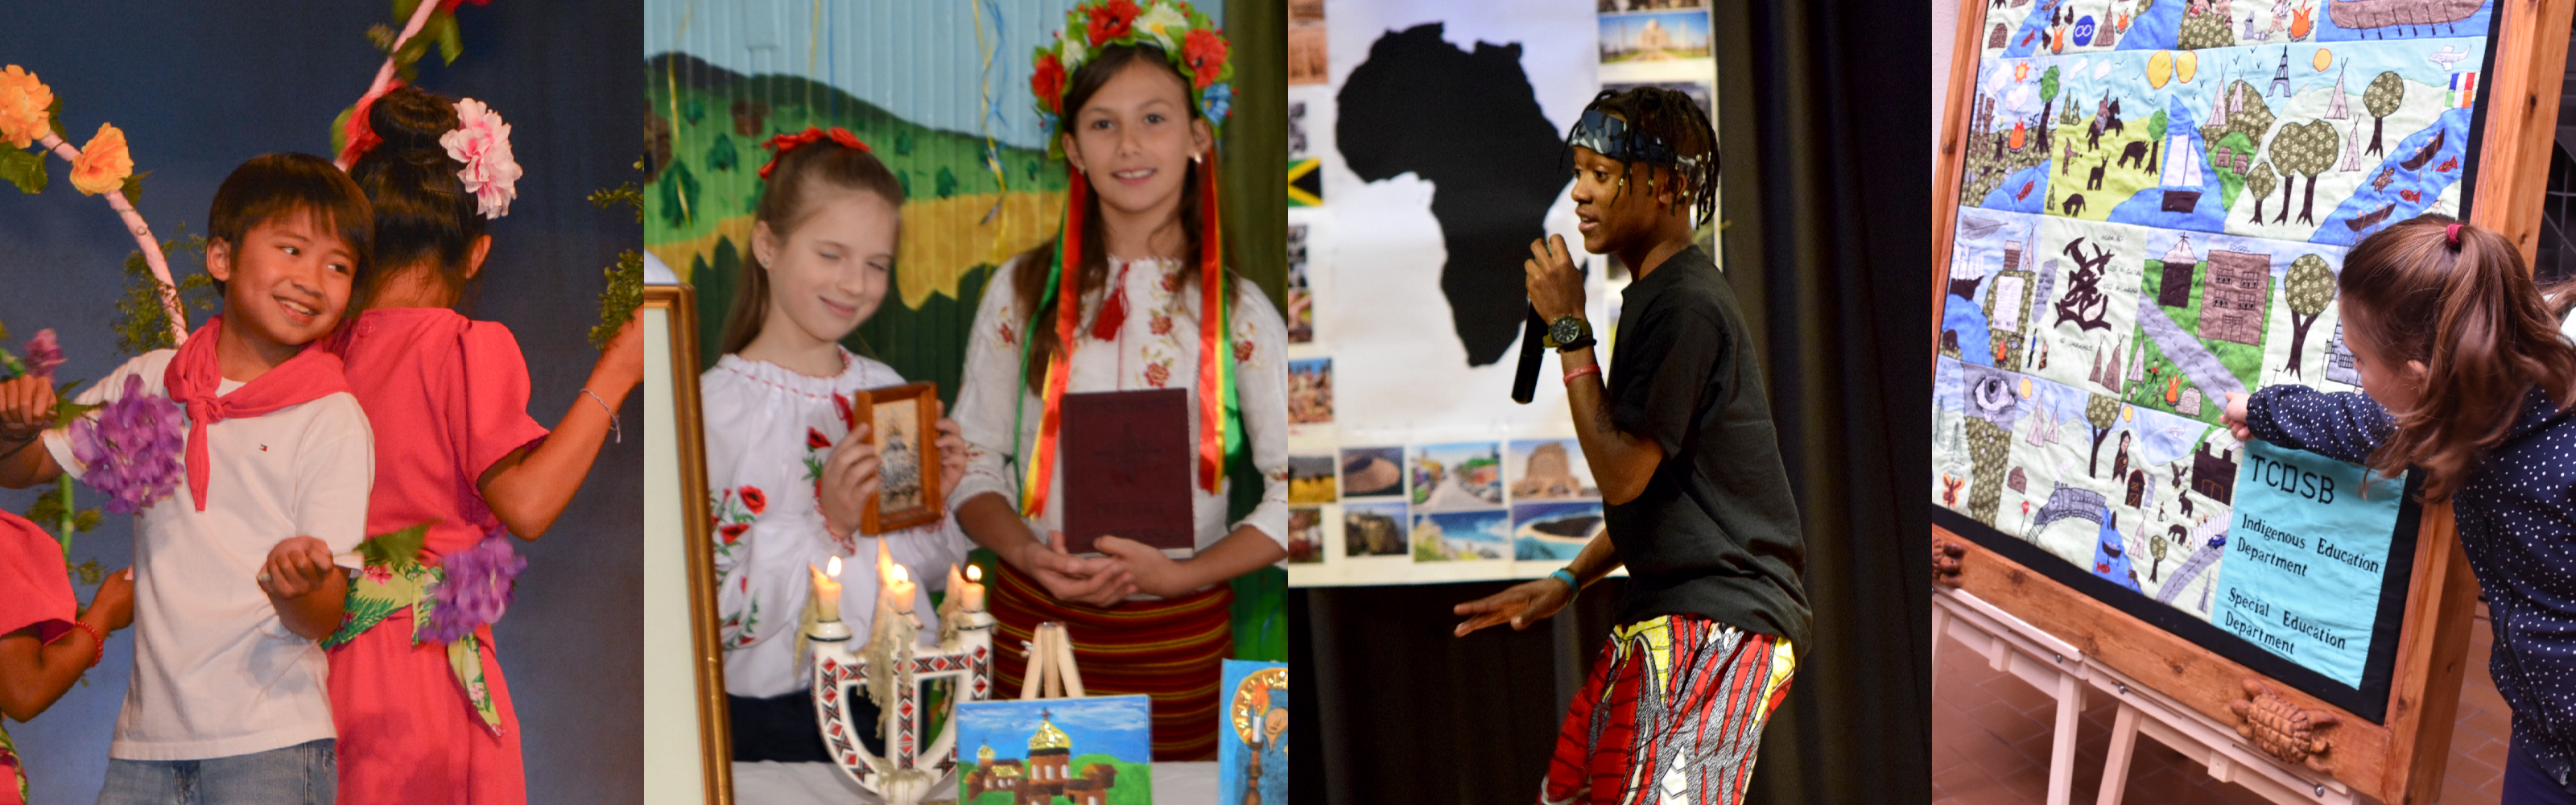 An image consists of 4 photos. First photo consists of 2 students dancing; second photo consists of 2 students standing in front of a table smiling; third photo consists of a student singing; forth photo consists of a student showcasing her artwork. 